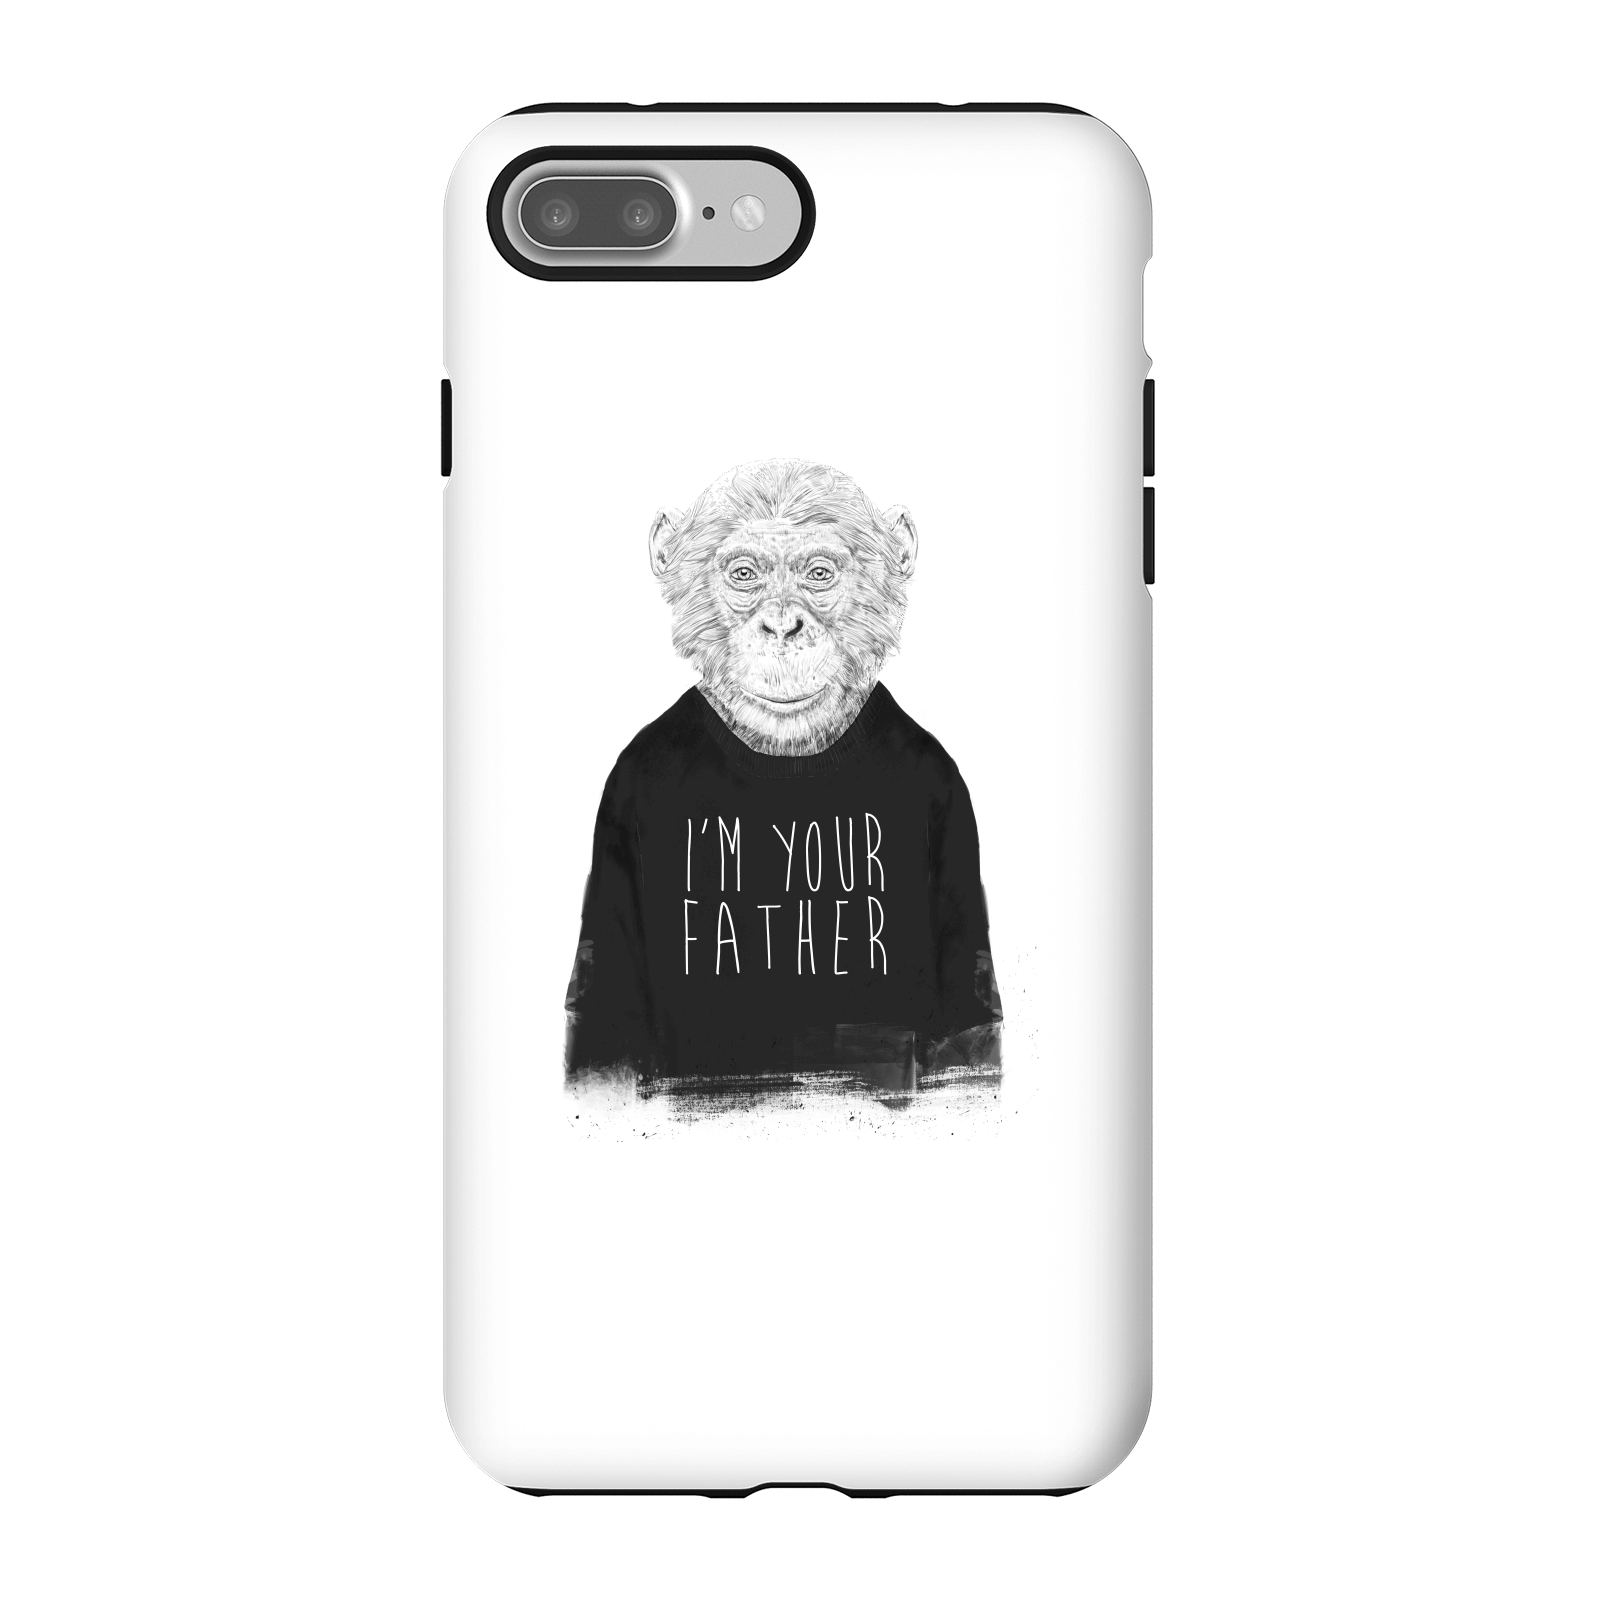 Balazs Solti I'm Your Father Phone Case for iPhone and Android - iPhone 7 Plus - Tough Case - Gloss